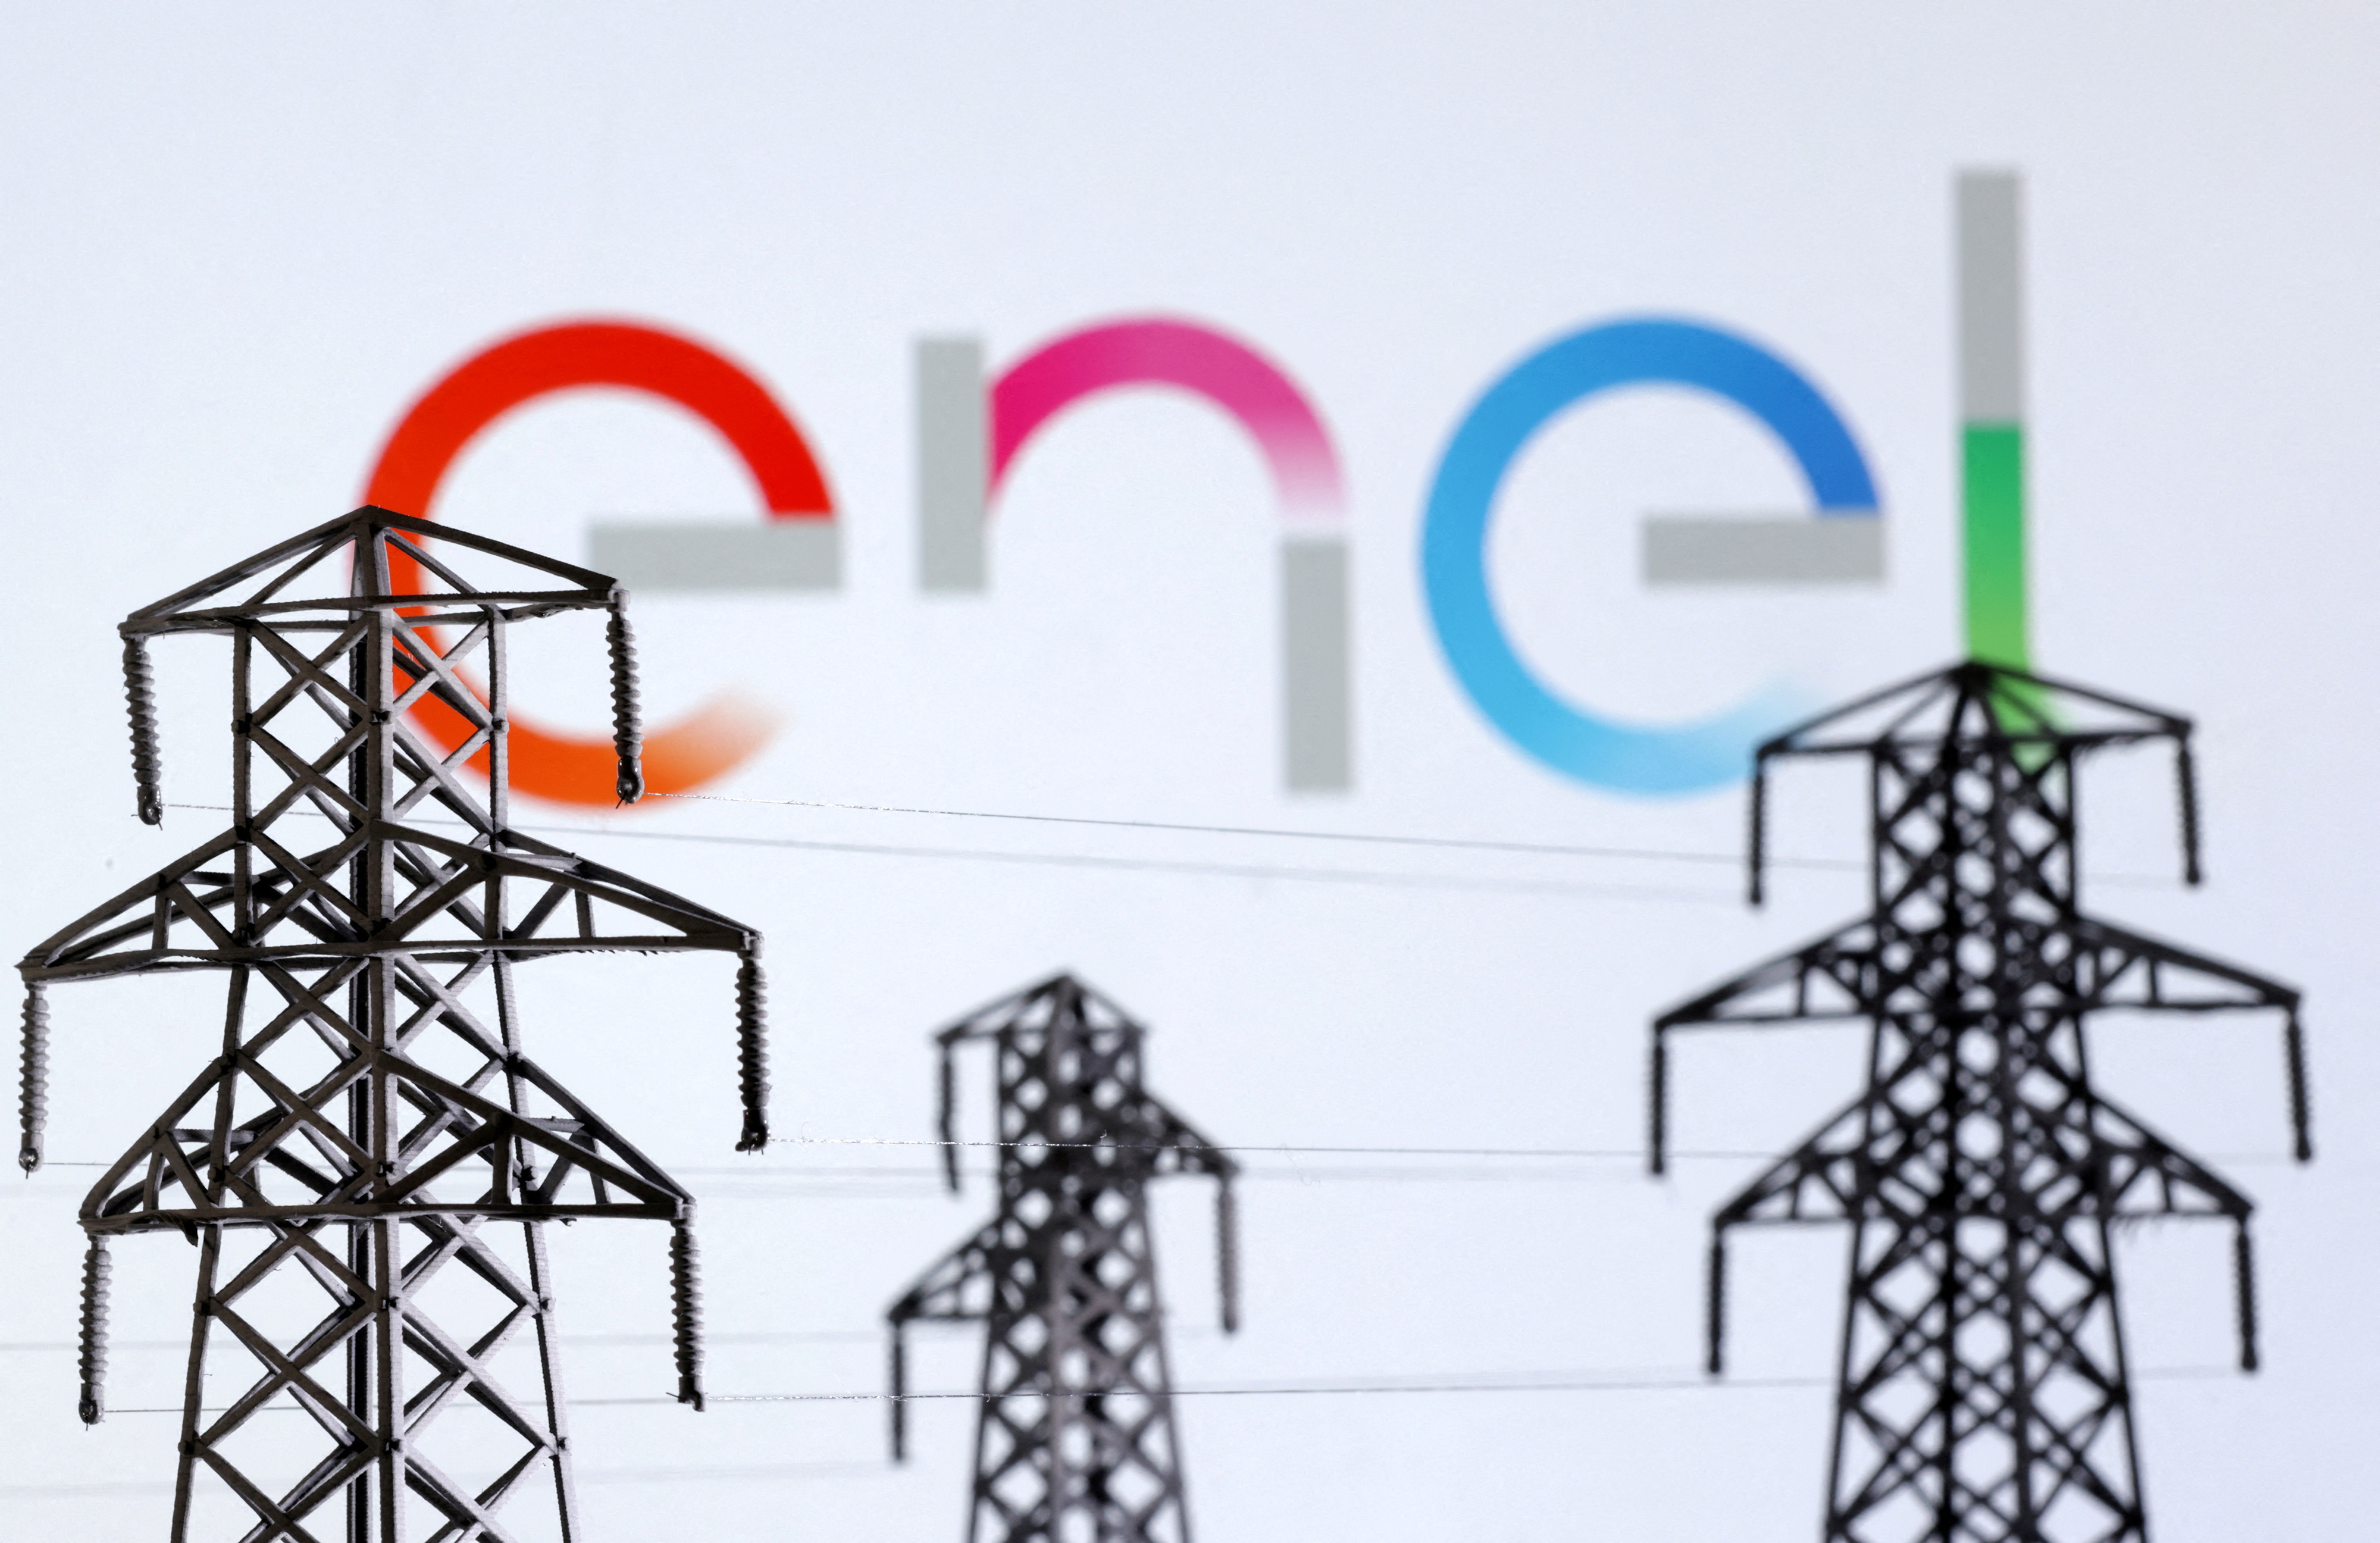 Enel agrees to sell two Peruvian assets to China's CSGI for $2.9 bln